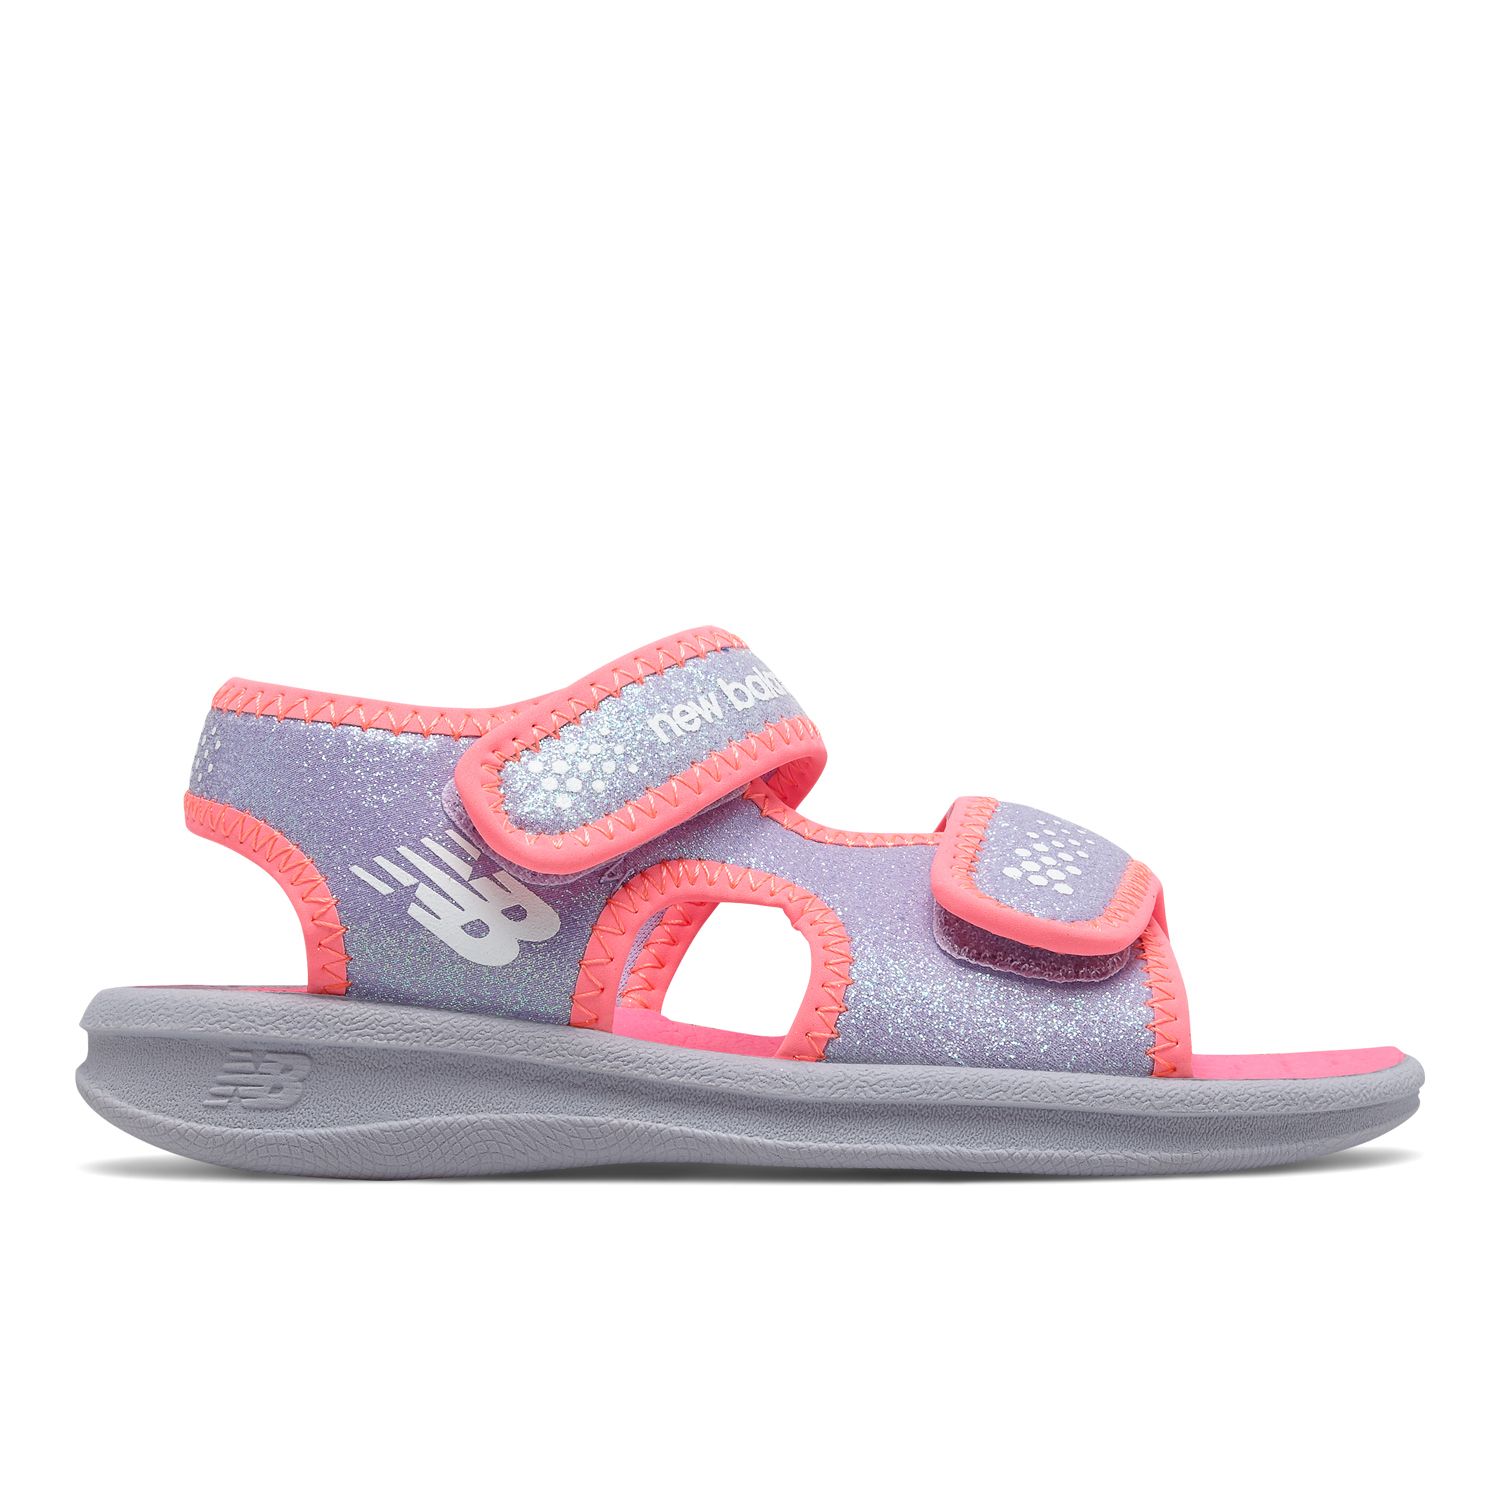 new balance sandals for toddlers